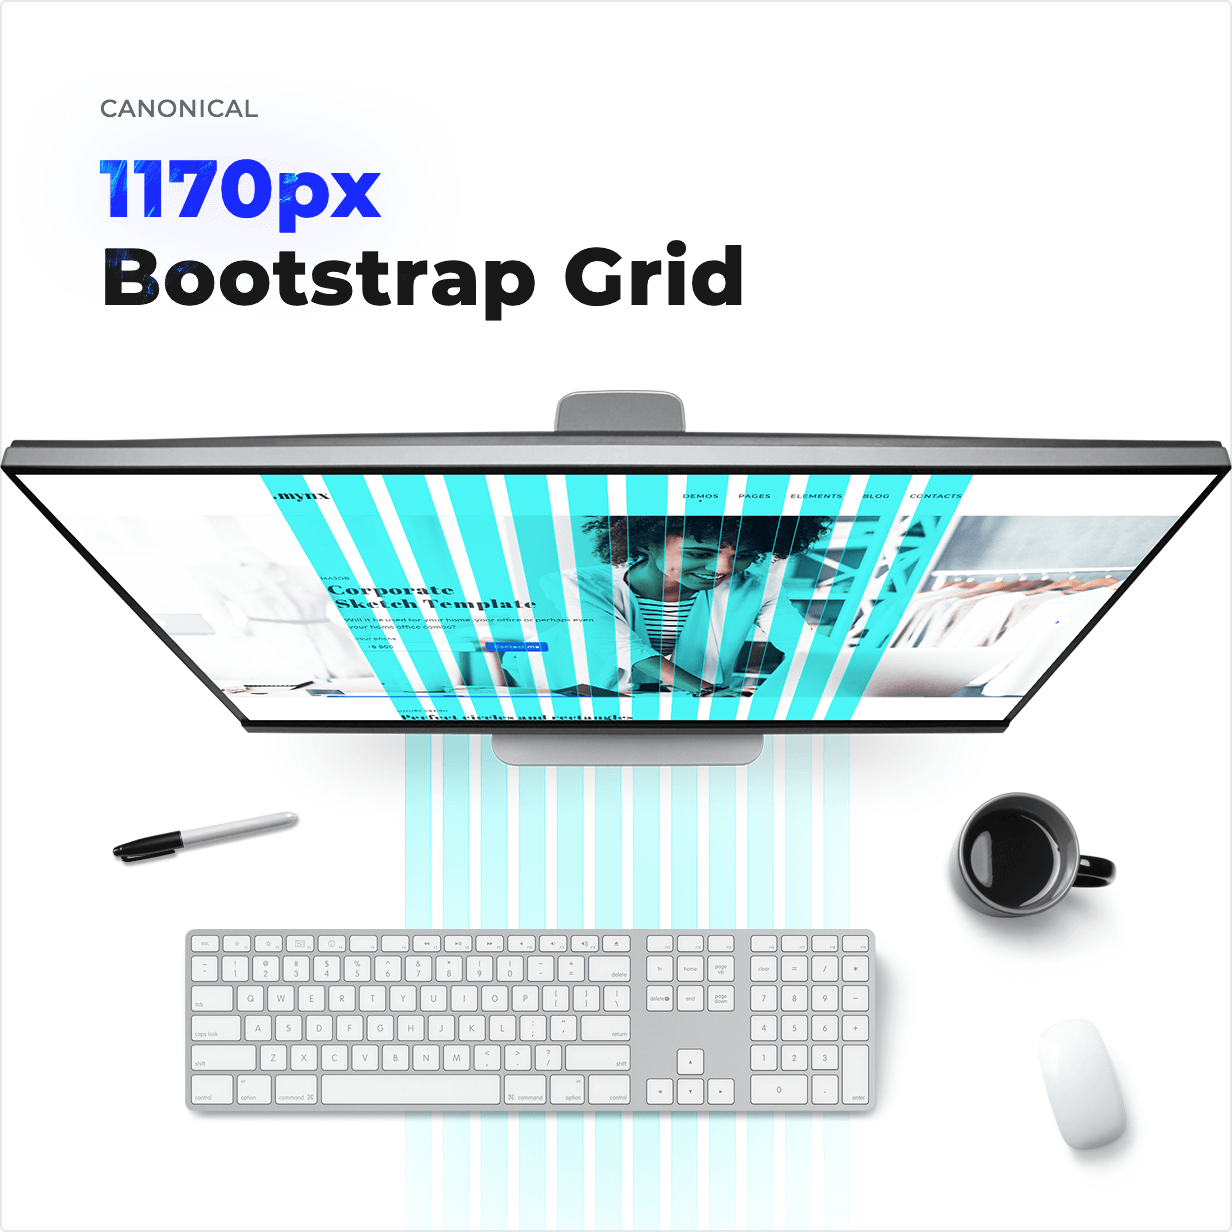 Canonical 1170px Bootstrap Grid